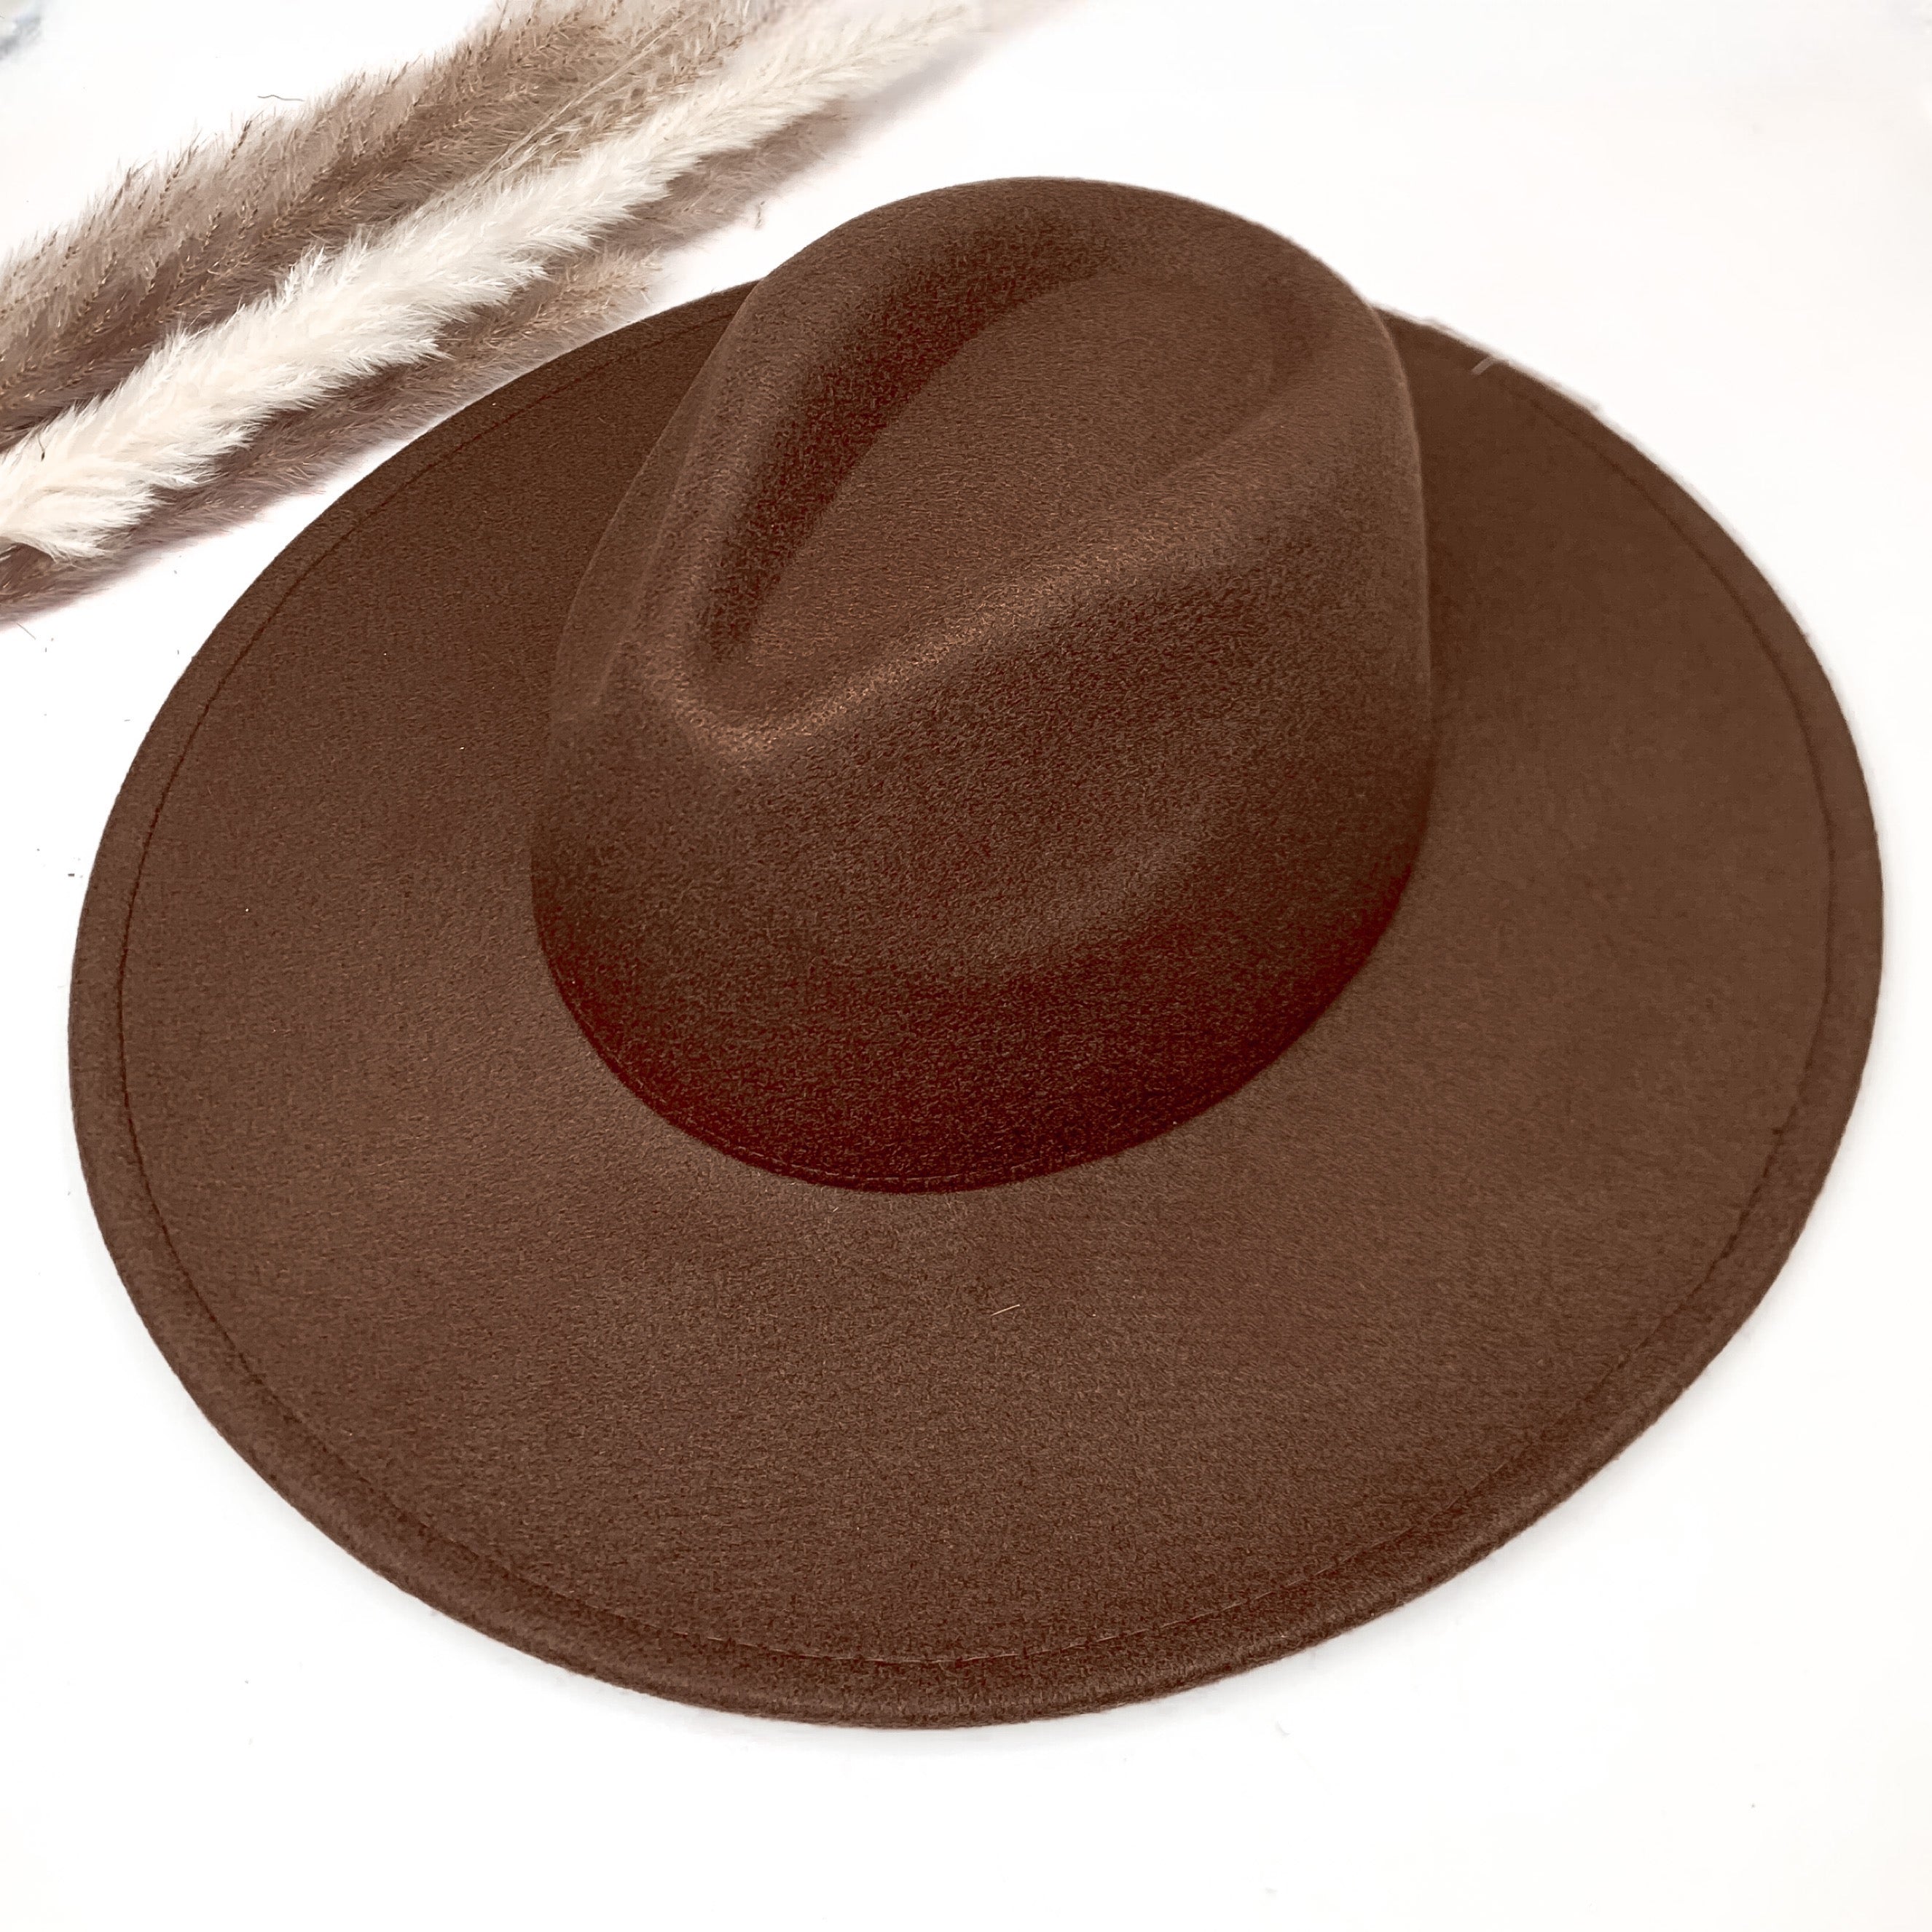 Plain and simple faux felt hat in dark brown color. This hat is sitting on a white background. There is brown and white feathers to the left of the hat.